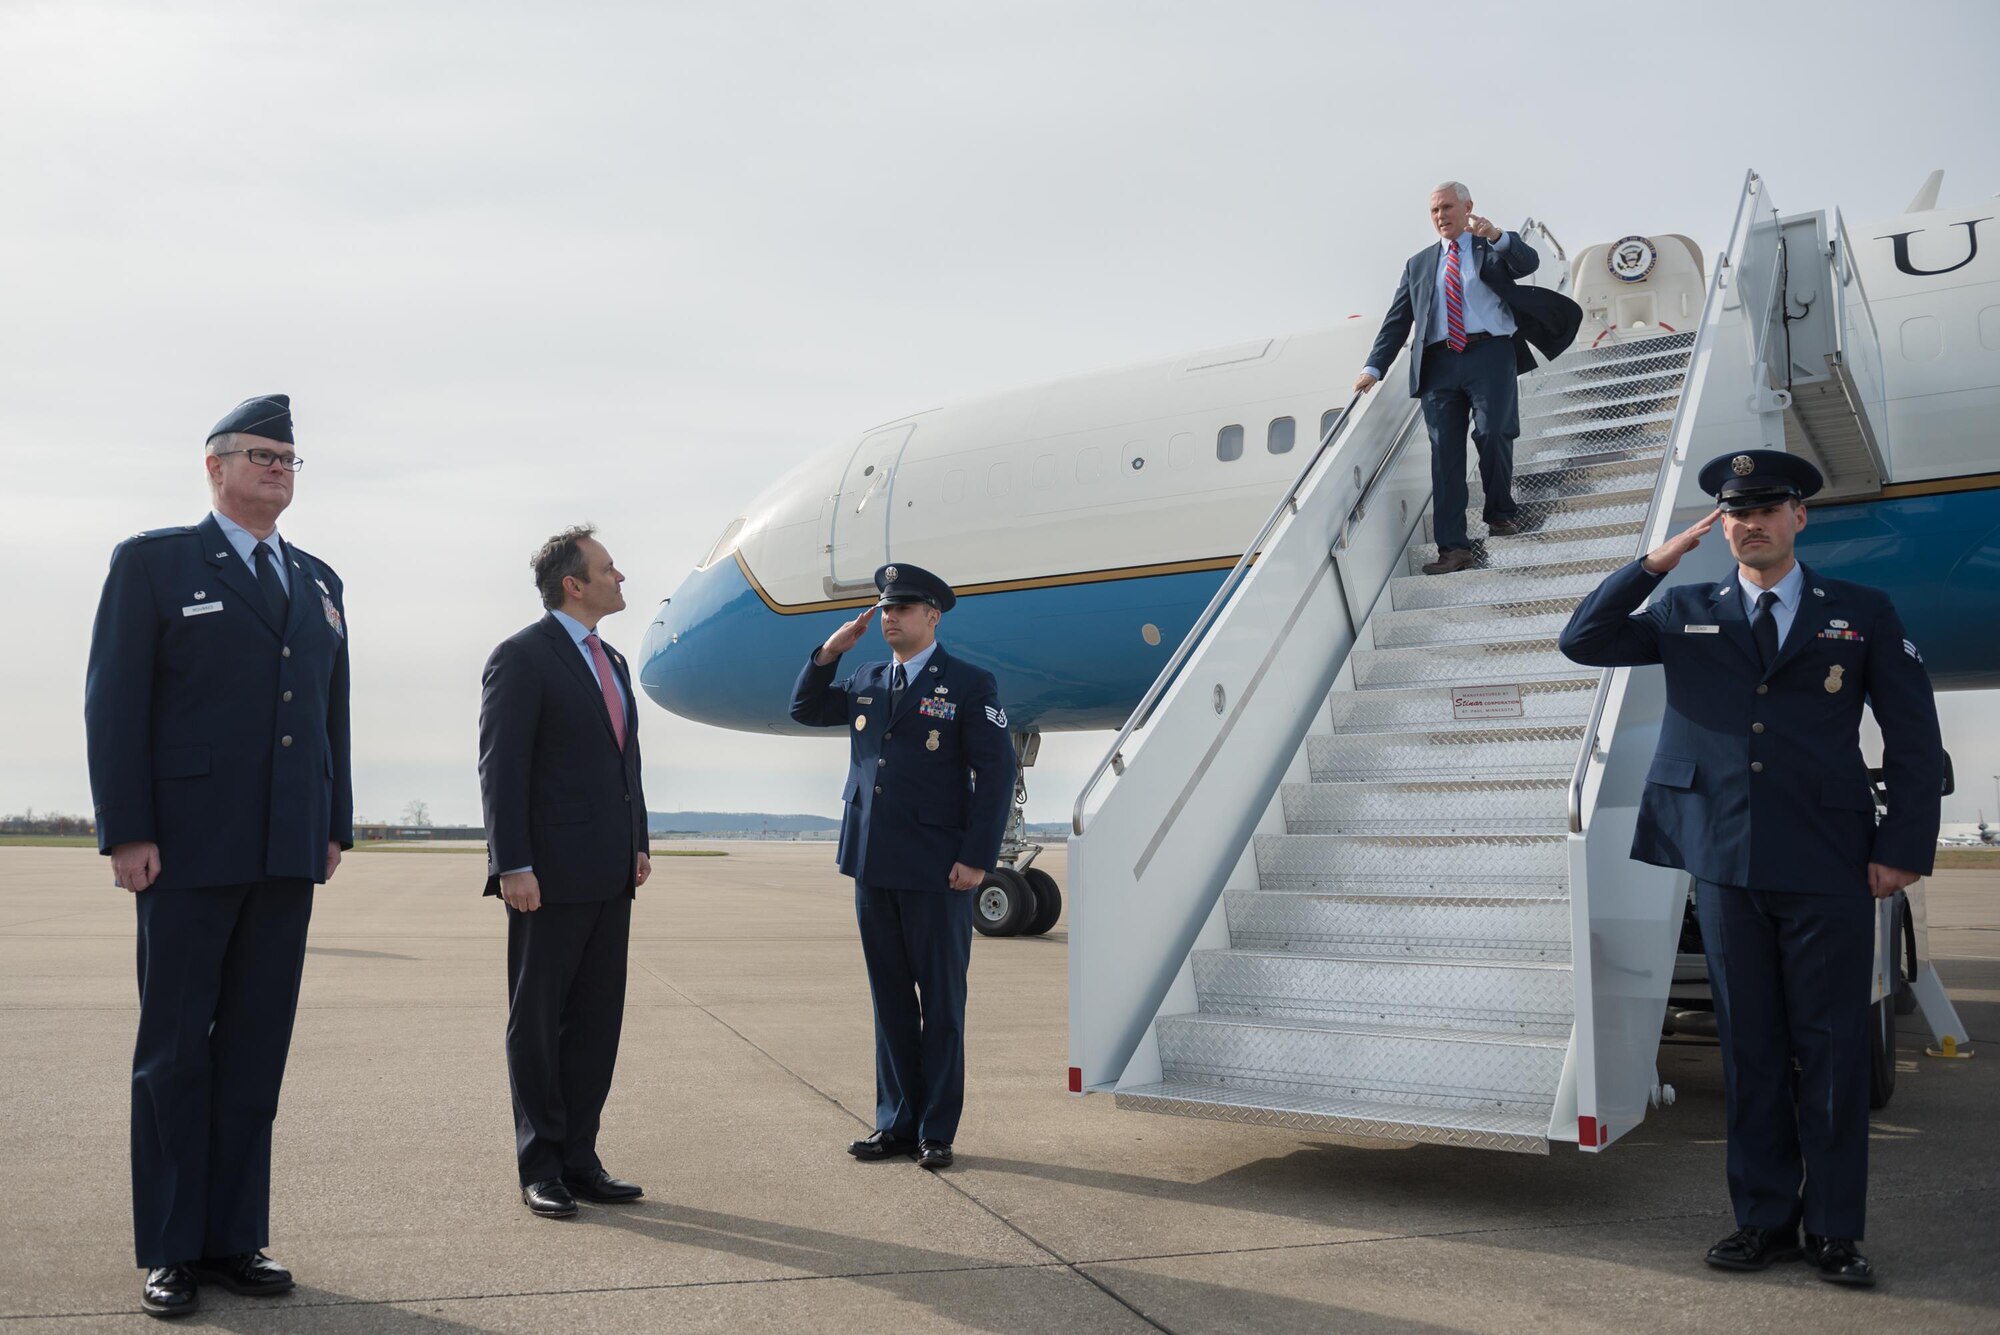 Col. David Mounkes (left), commander of the 123rd Airlift Wing, and Kentucky Gov. Matt Bevin (second from left) stand by to greet Vice President Mike Pence as he arrives at the Kentucky Air National Guard Base in Louisville, Ky., March 11, 2017. Pence was in Louisville to speak with local business leaders about health care and the economy. (U.S. Air National Guard photo by Staff Sgt. Joshua Horton)